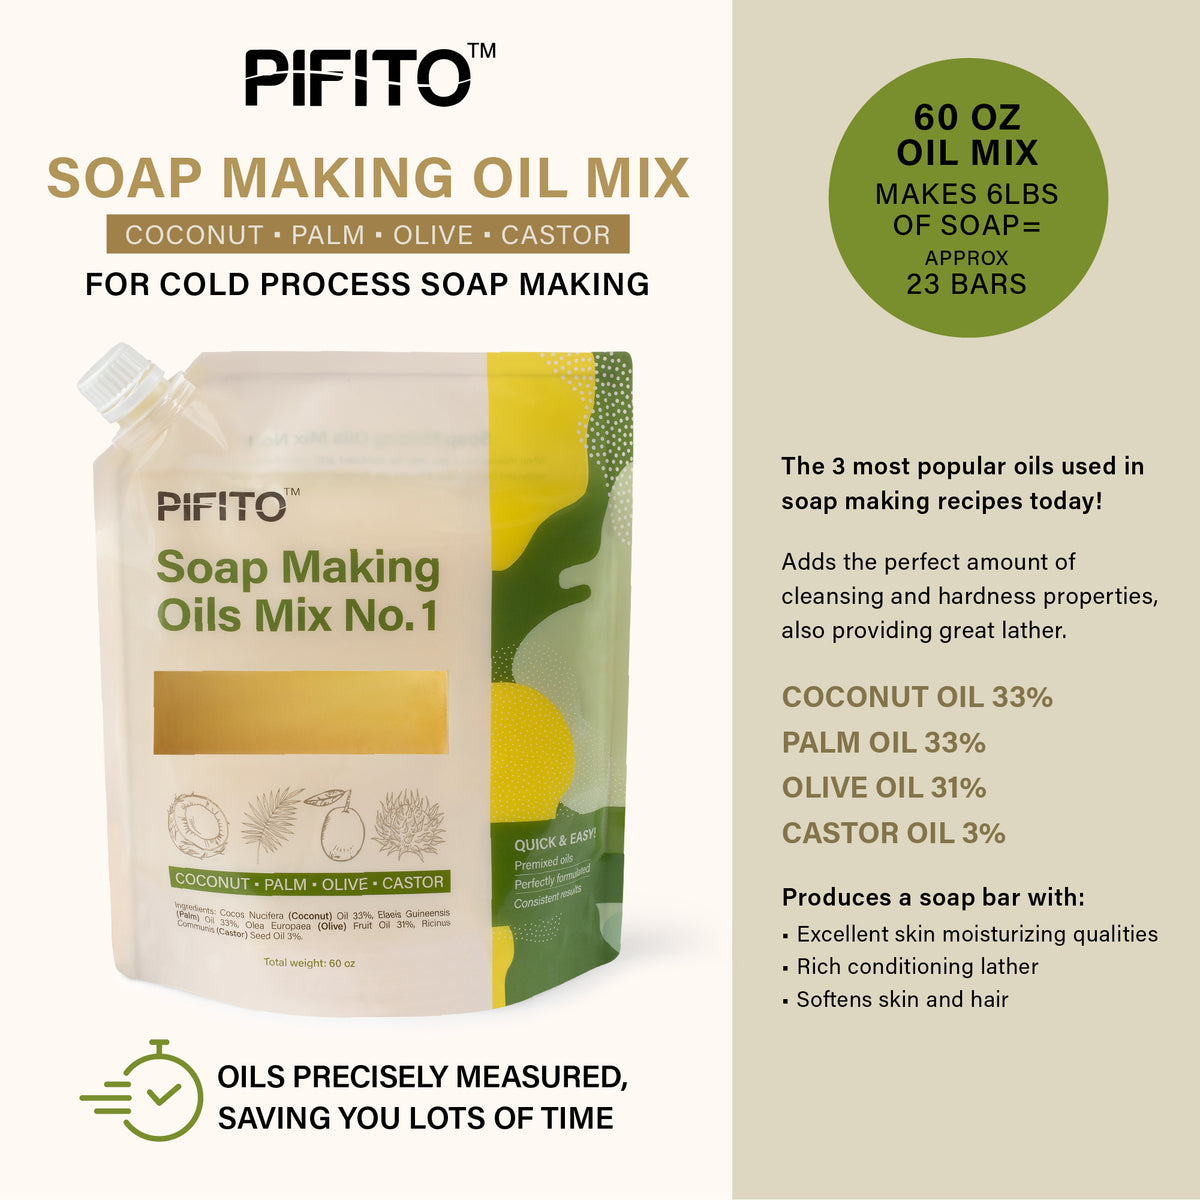 Pifito Soap Making Kit │ DIY Soap Making Supplies - 3 lbs Melt and Pour  Soap Base (Shea Butter, Goats Milk, Oatmeal), 8-Pack Oxide Pigment  Colorants